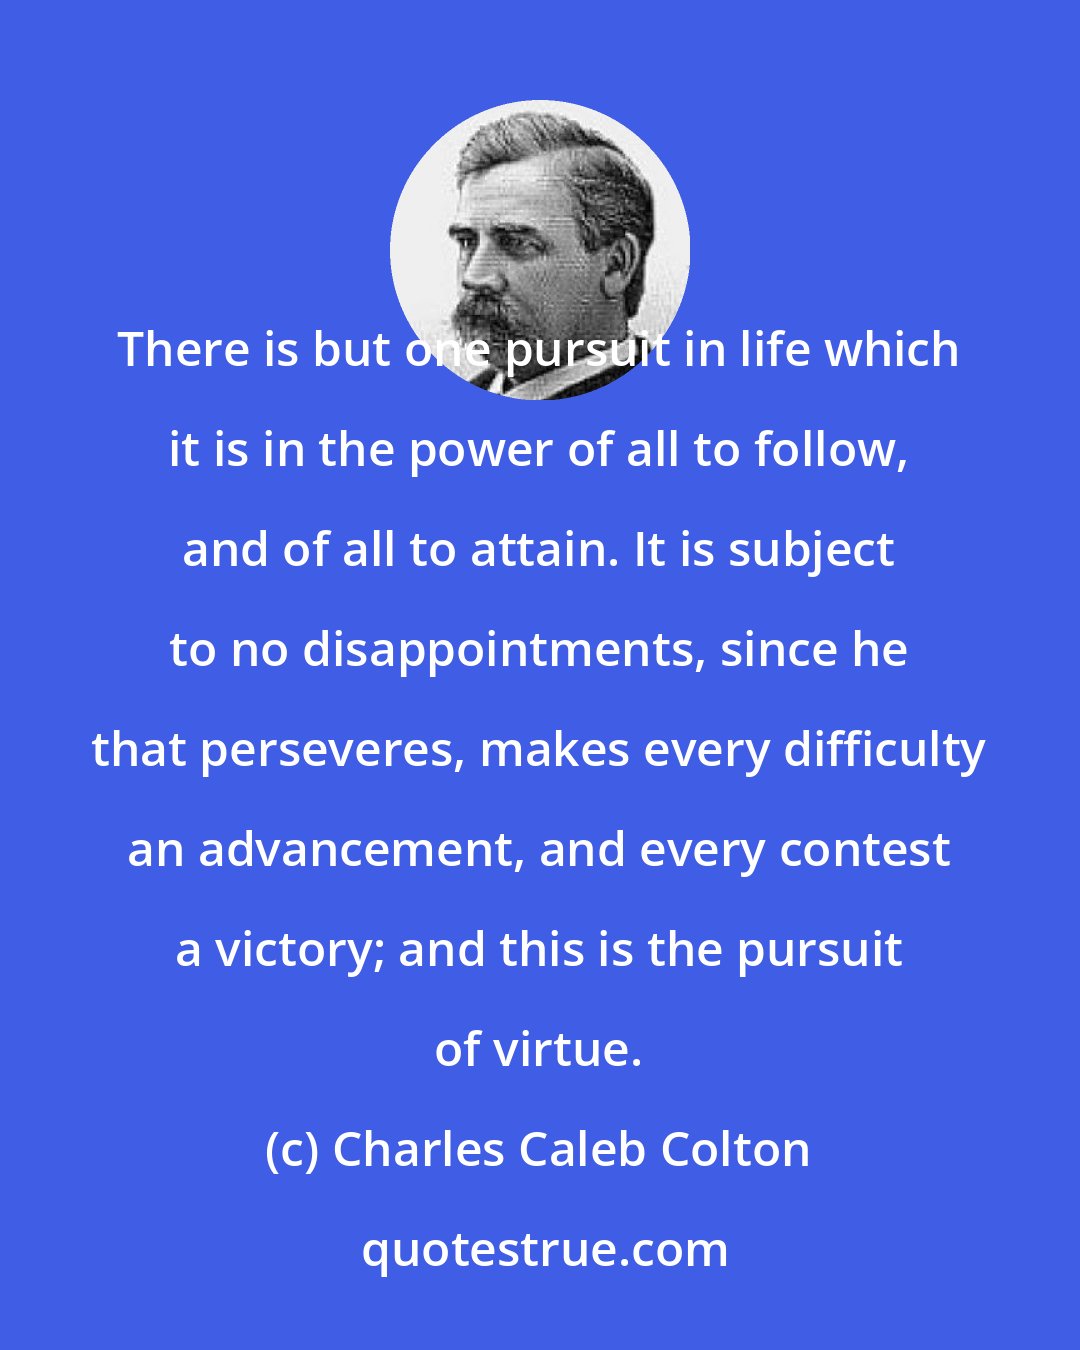 Charles Caleb Colton: There is but one pursuit in life which it is in the power of all to follow, and of all to attain. It is subject to no disappointments, since he that perseveres, makes every difficulty an advancement, and every contest a victory; and this is the pursuit of virtue.